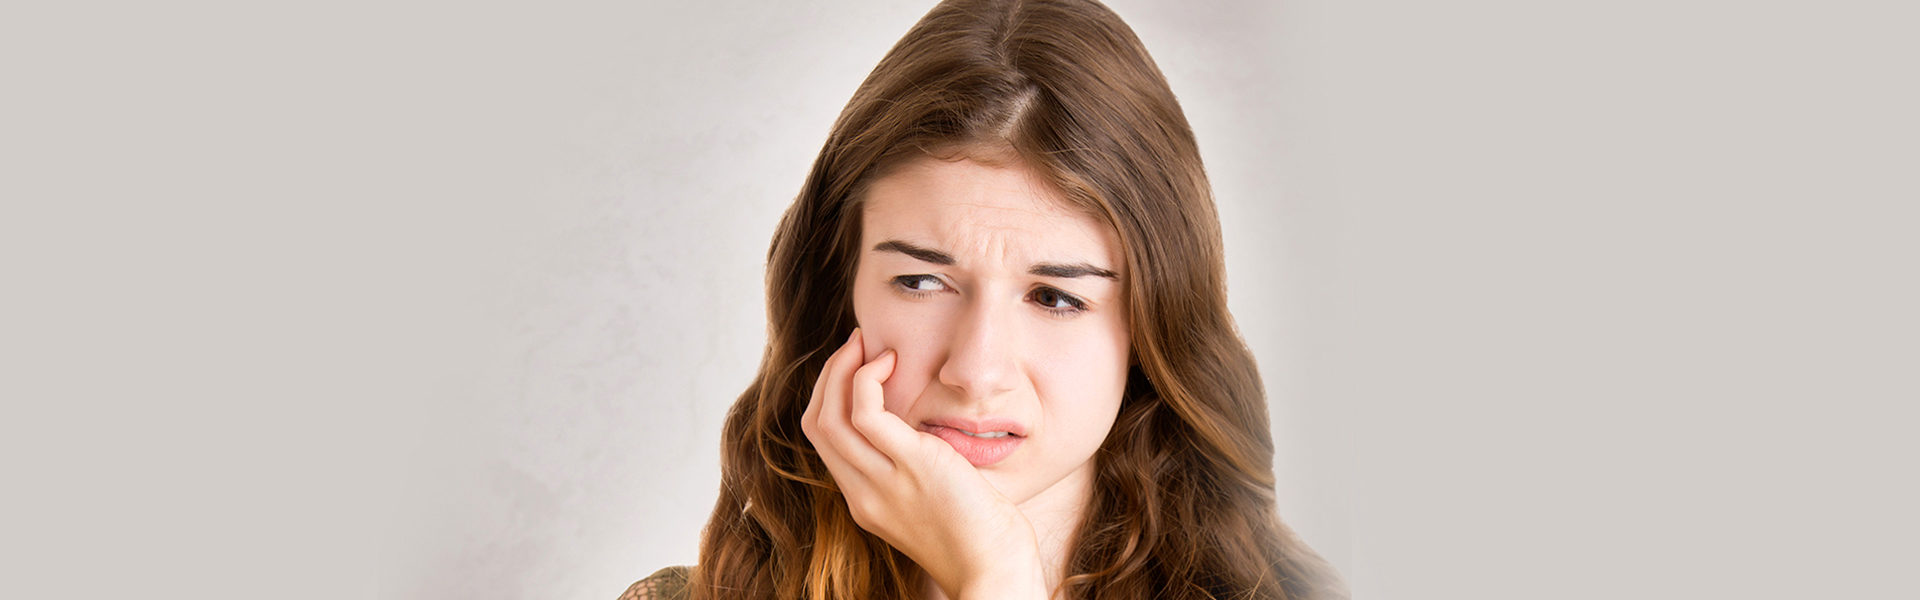 Wisdom Teeth Extractions in Salmon Arm, BC